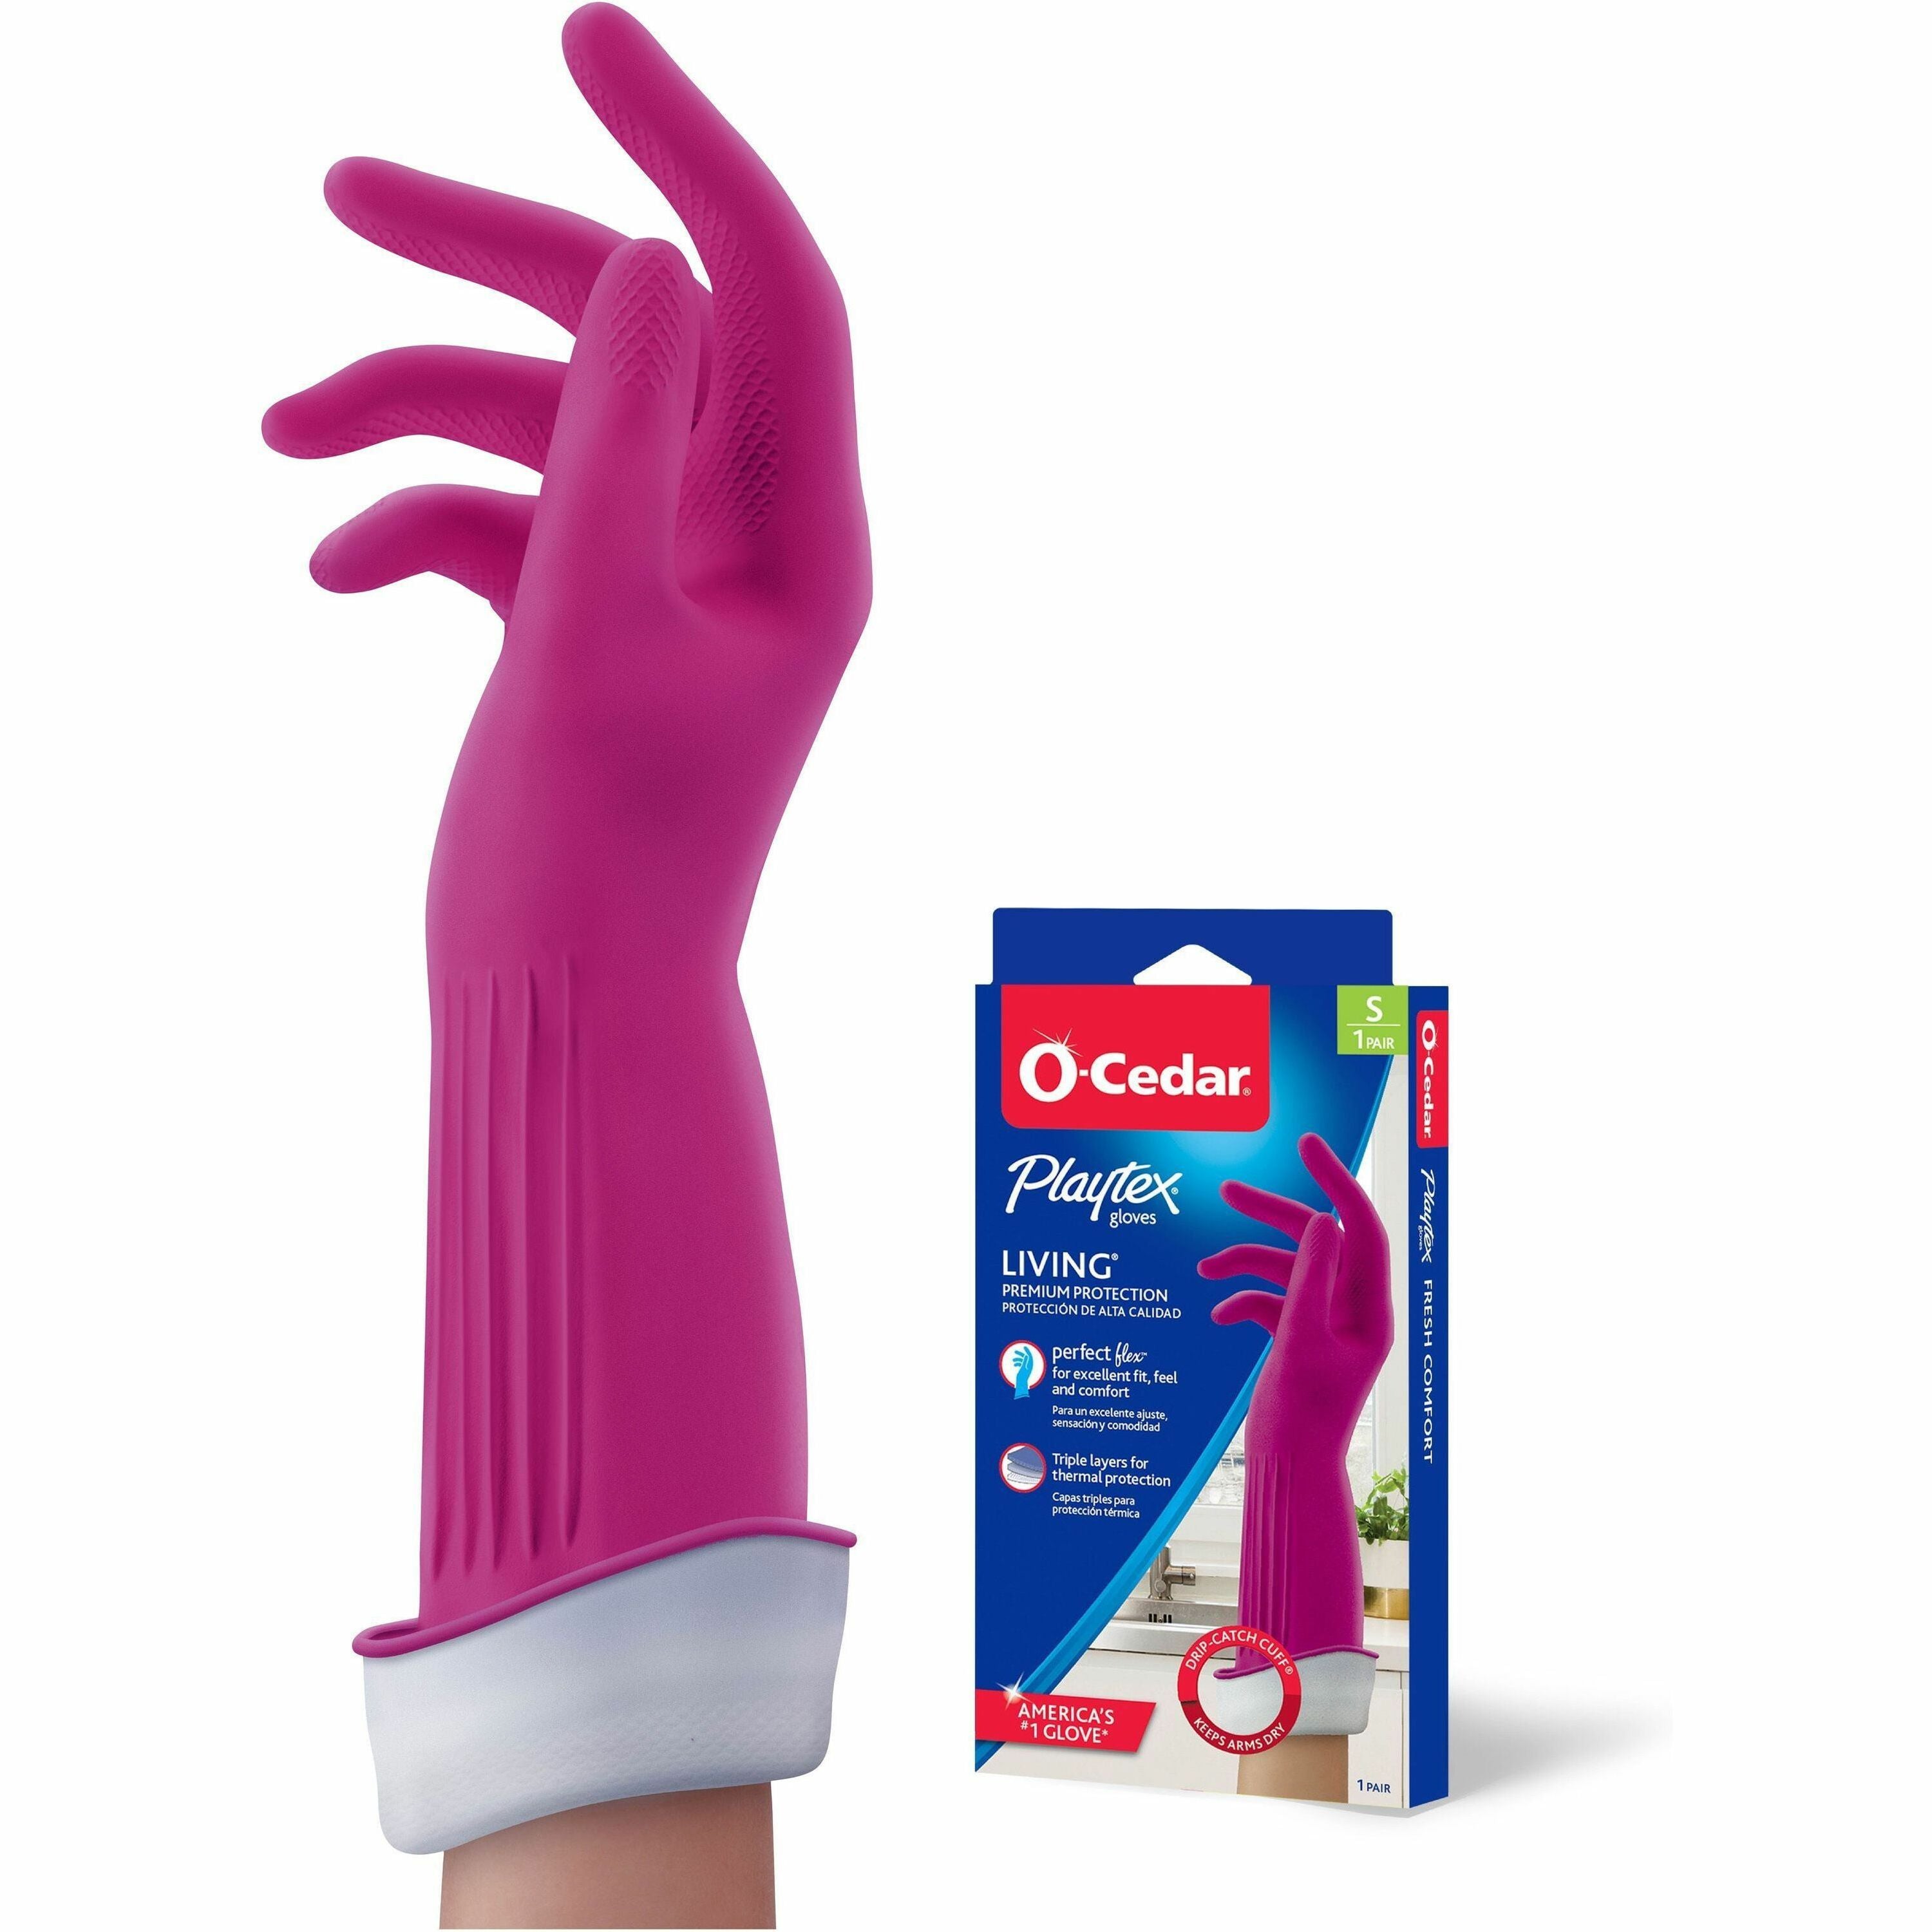 o-cedar-playtex-living-gloves-chemical-bacteria-protection-small-size-latex-neoprene-nitrile-pink-anti-microbial-reusable-durable-comfortable-odor-resistant-textured-palm-textured-fingertip-for-household-cleaning-2-pair-14_fhp166118 - 1